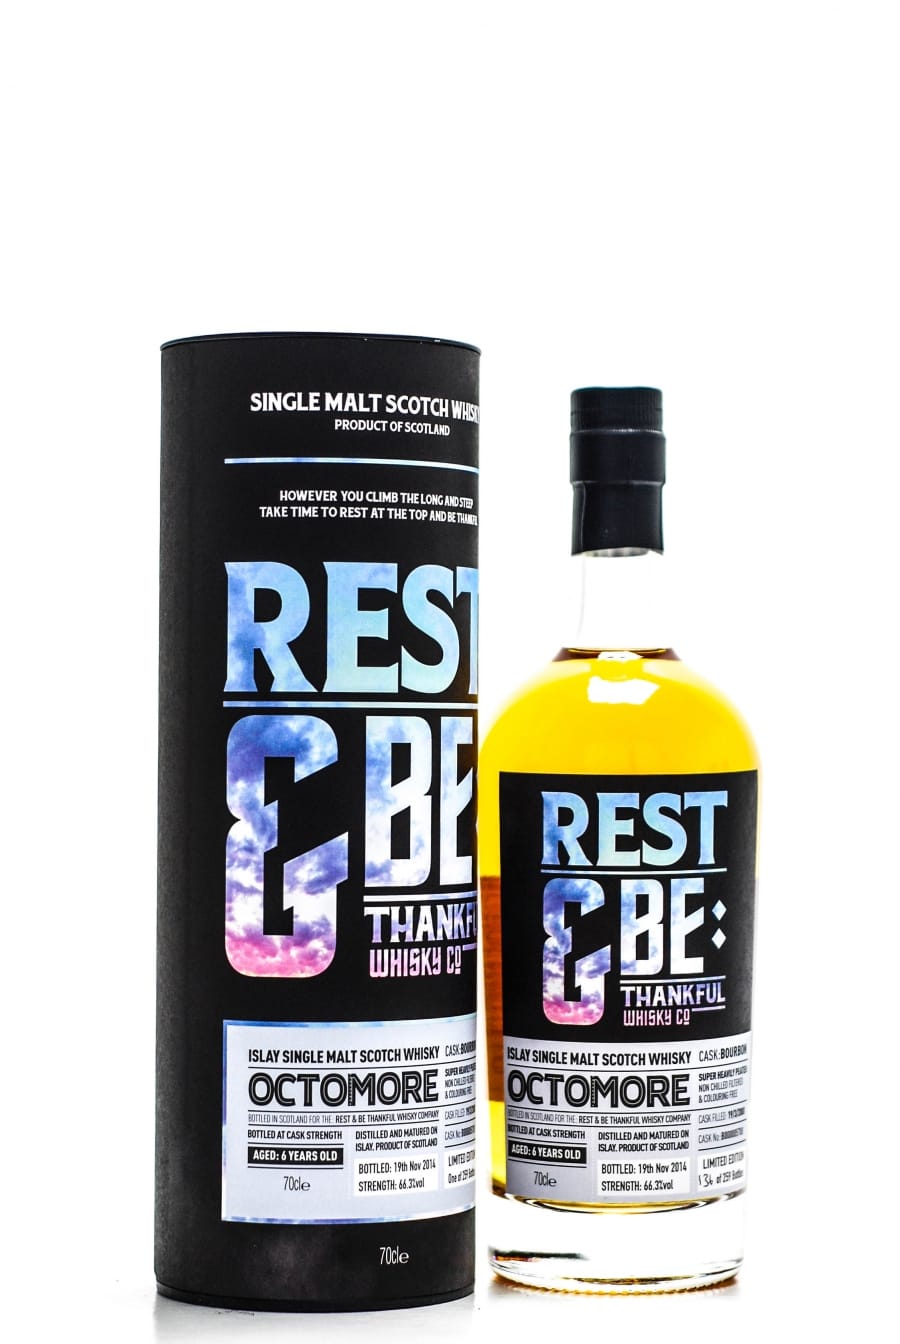 Bruichladdich - Octomore 6 Years Old Rest & be Thankful Whisky Company Cask:B000005708 66.3% 2008 In Original Container